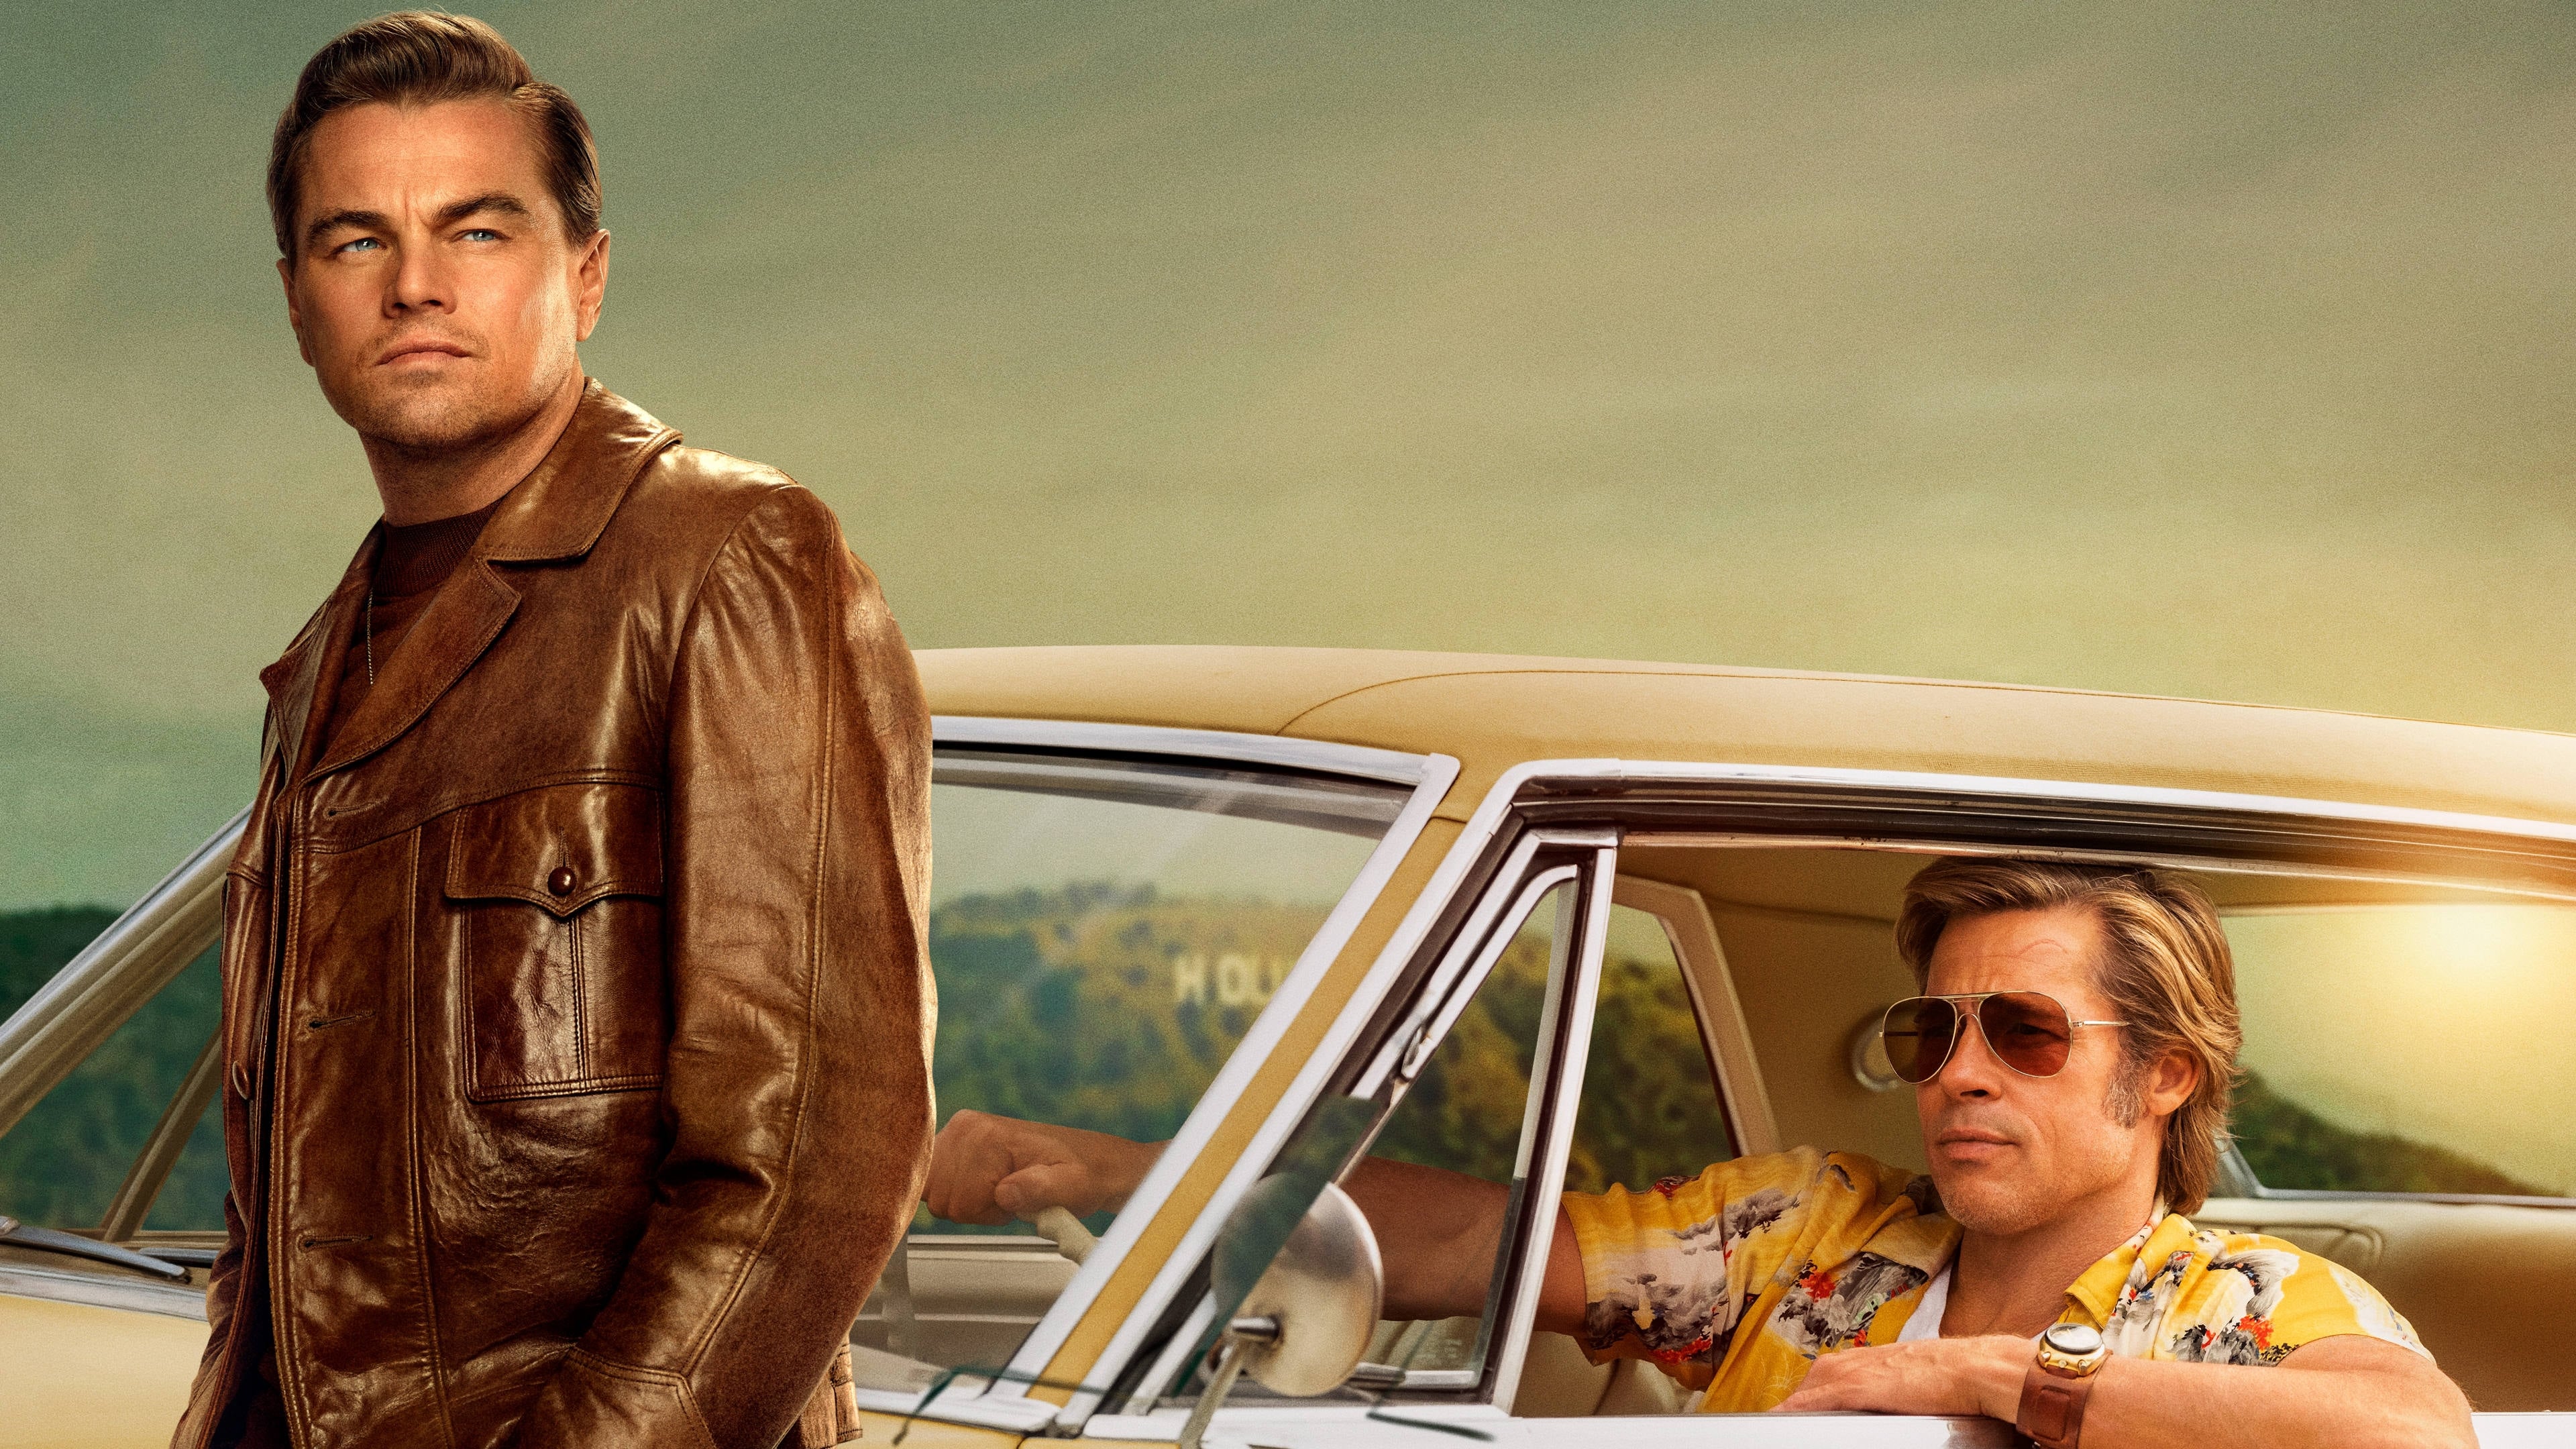 Image du film Once Upon a Time... in Hollywood rukebpmqumcp8oroeo5ayay29mgjpg